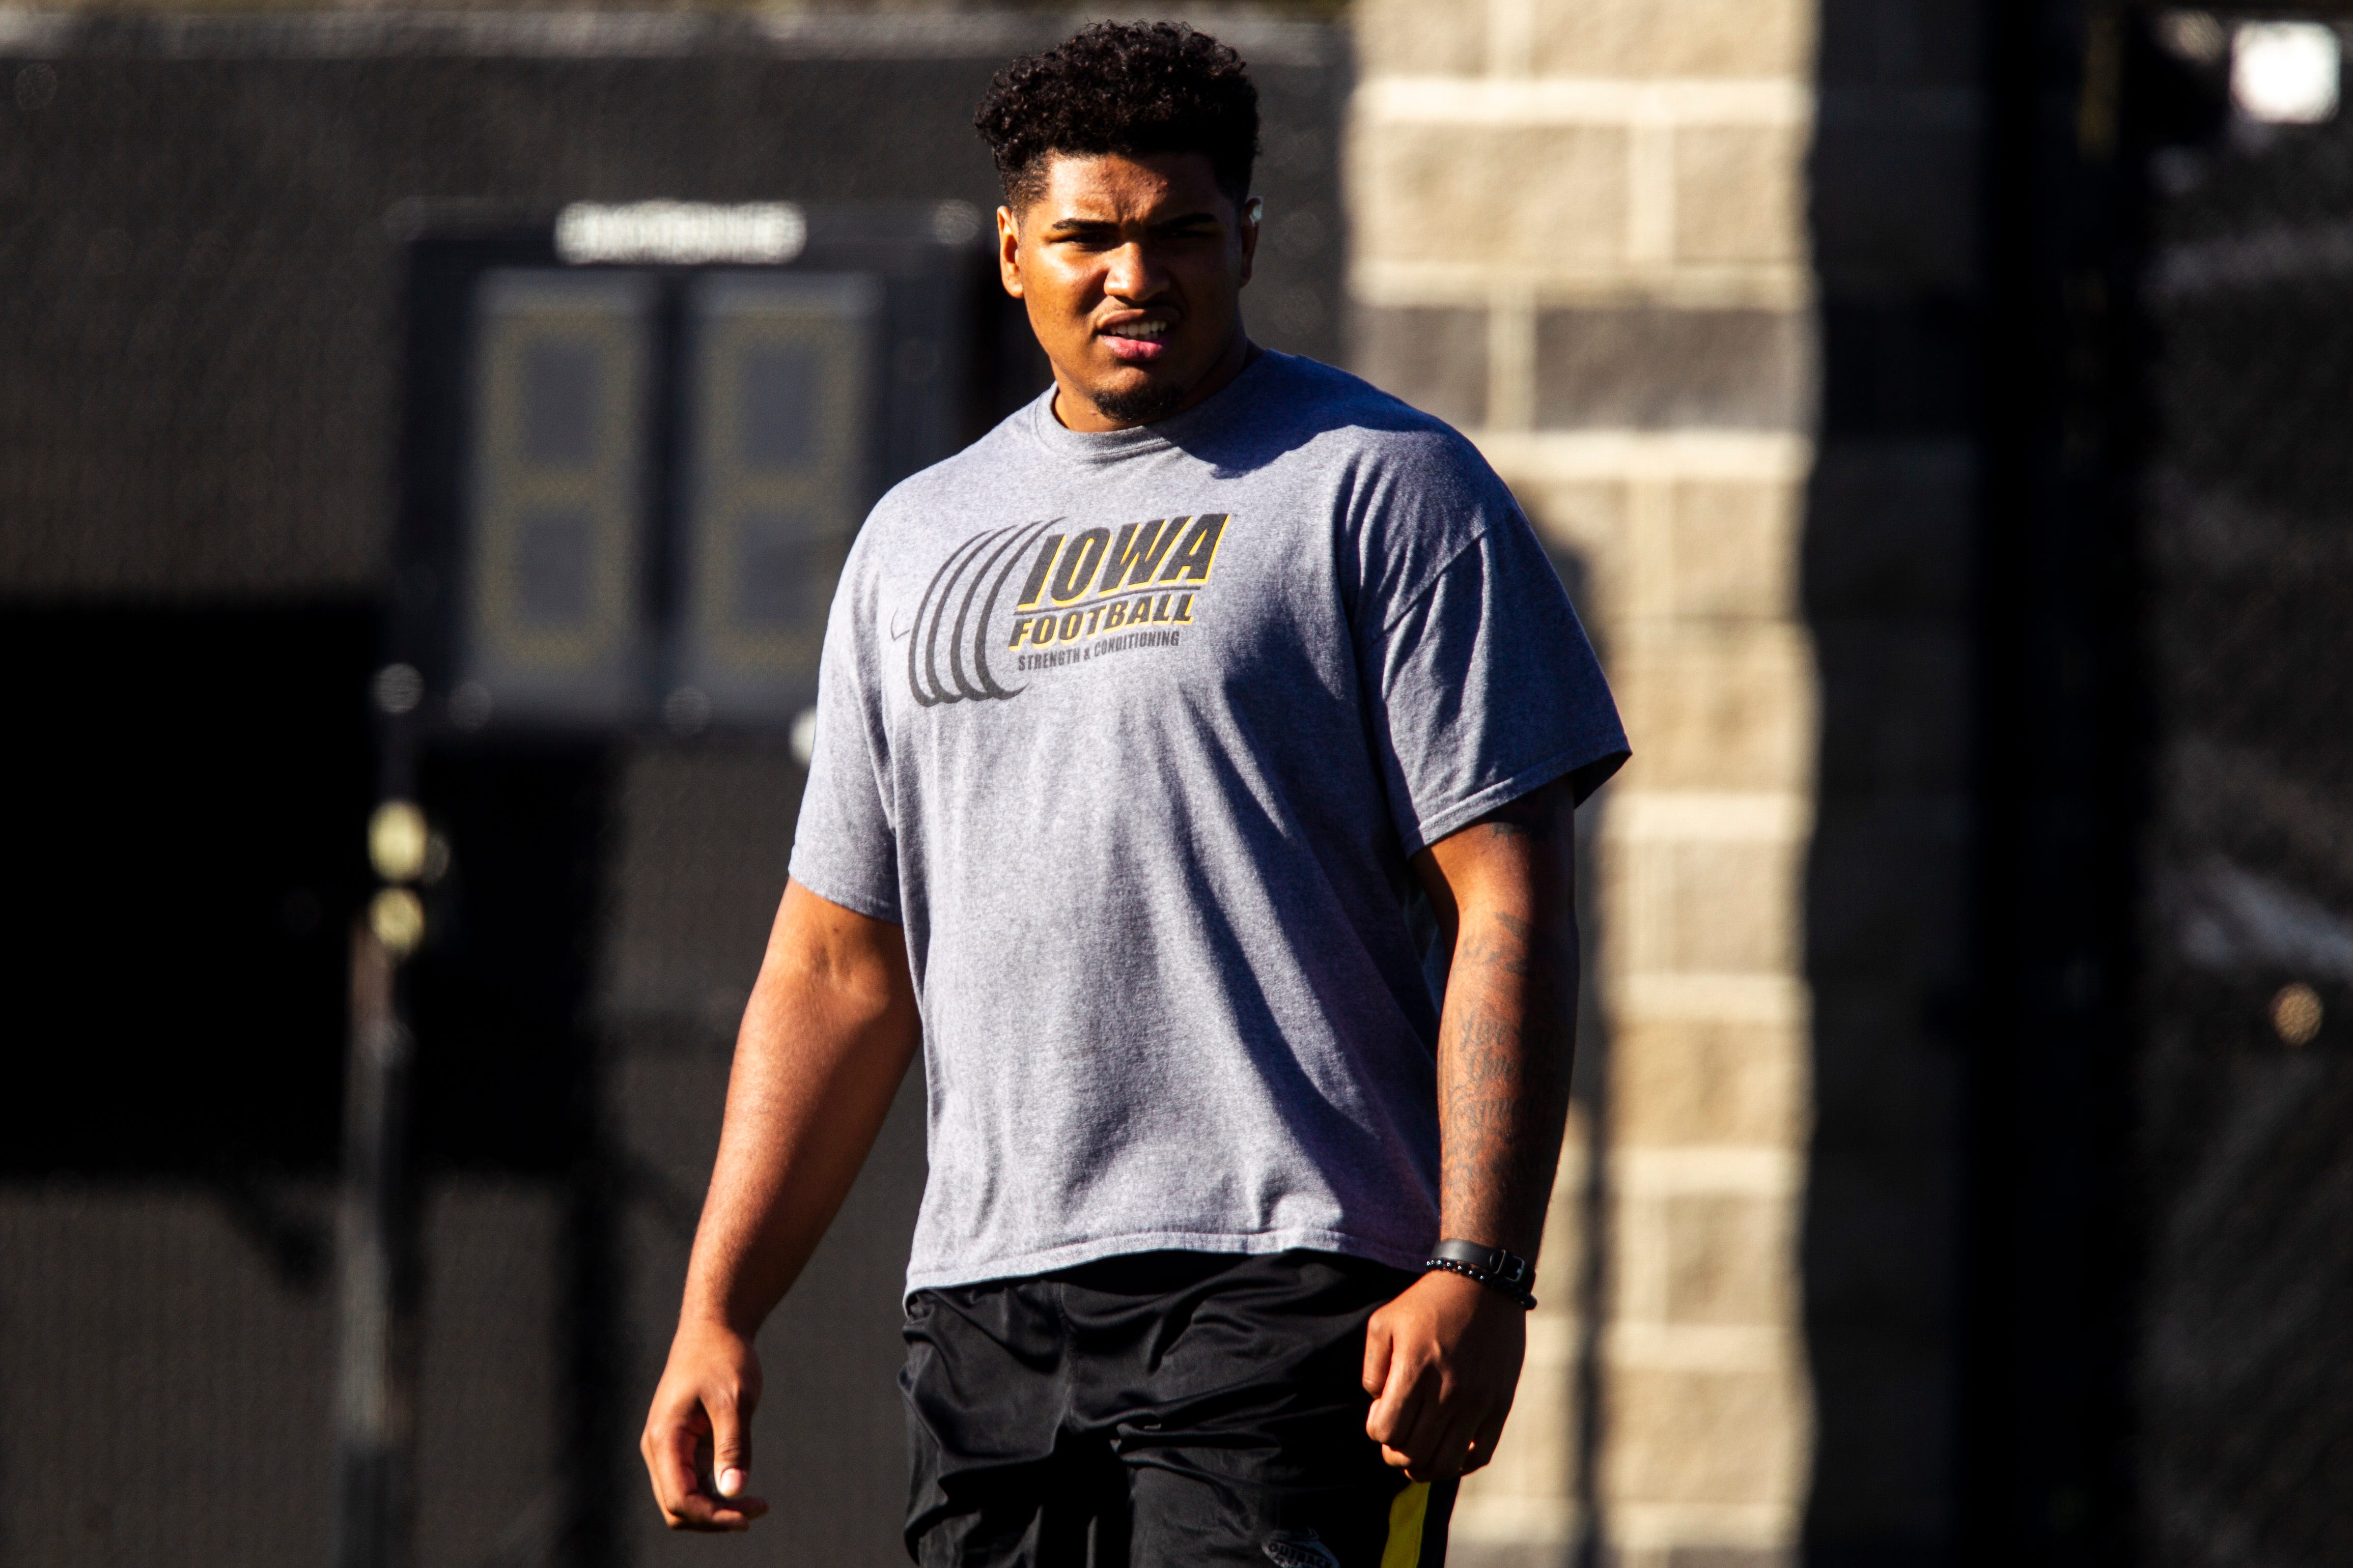 Iowa offensive lineman Tristan Wirfs is pictured during the final spring football practice, Friday, April 26, 2019, at the University of Iowa outdoor practice facility in Iowa City, Iowa.